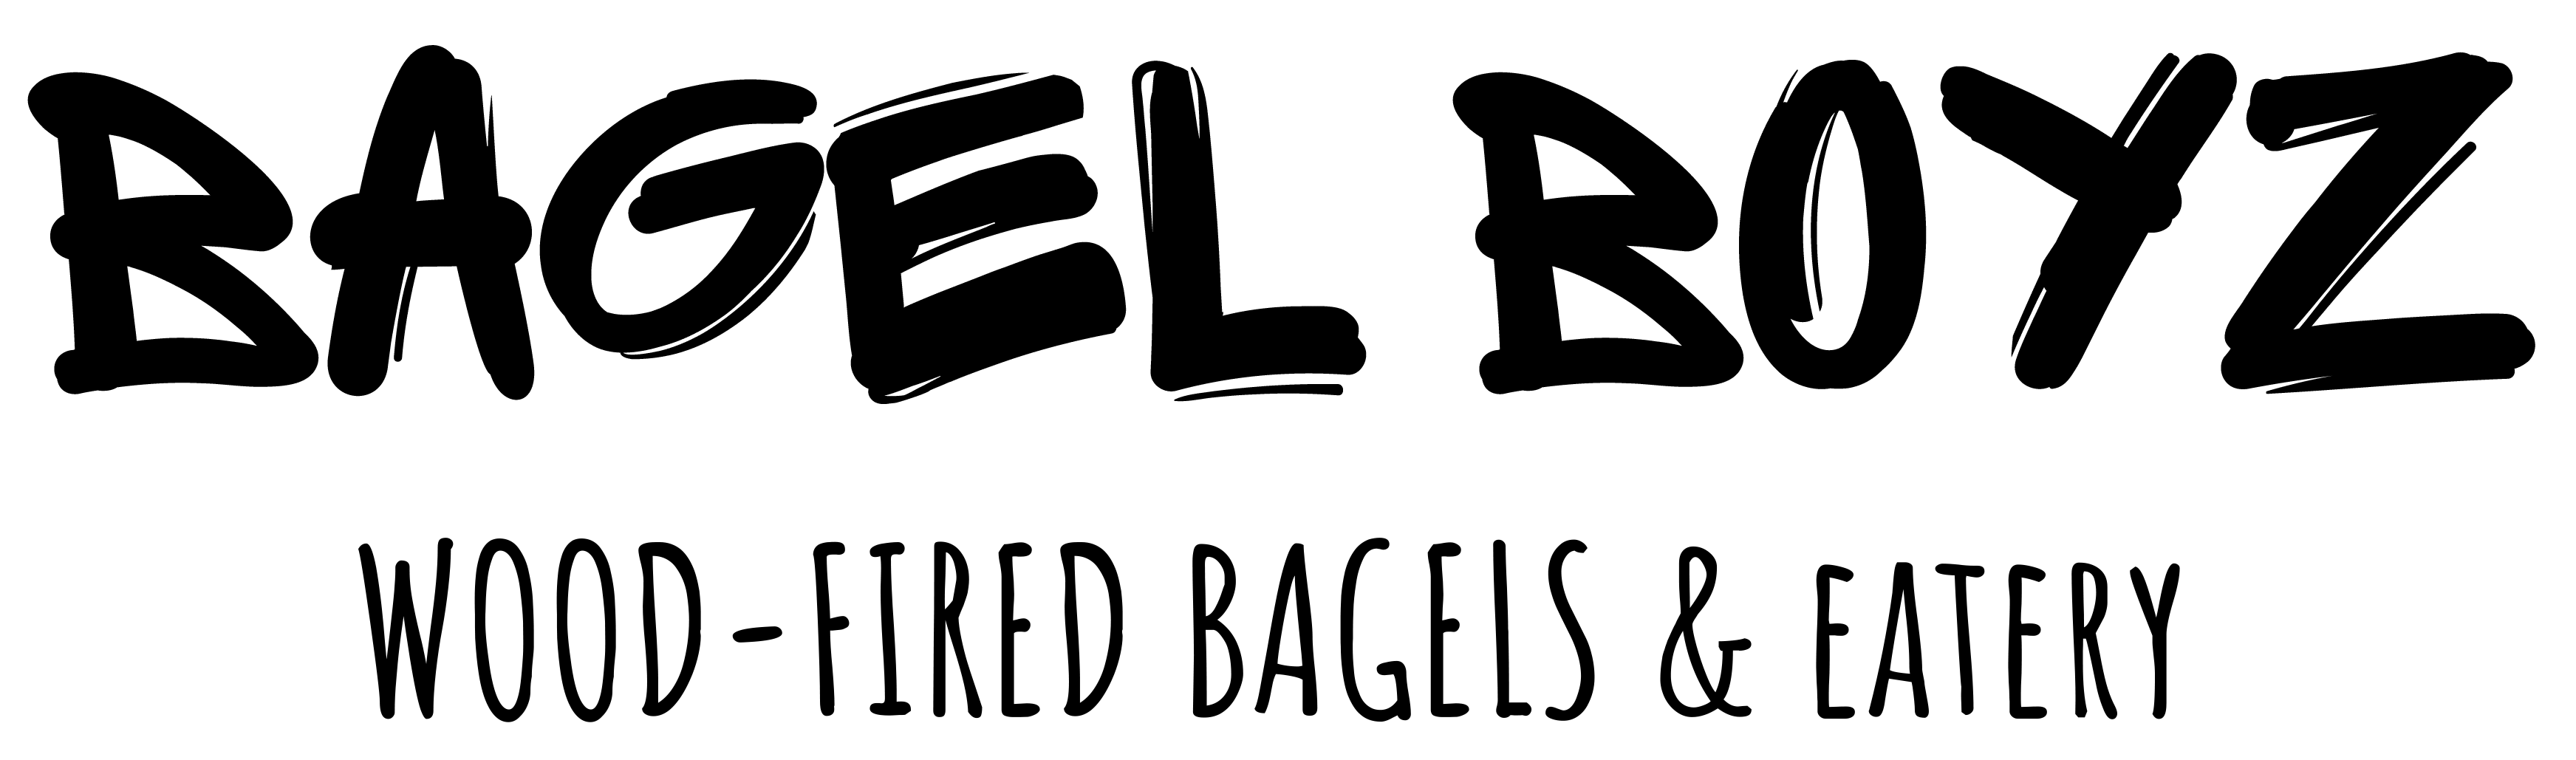 Bagel Boyz Woodfired Bagels and Pizza Home